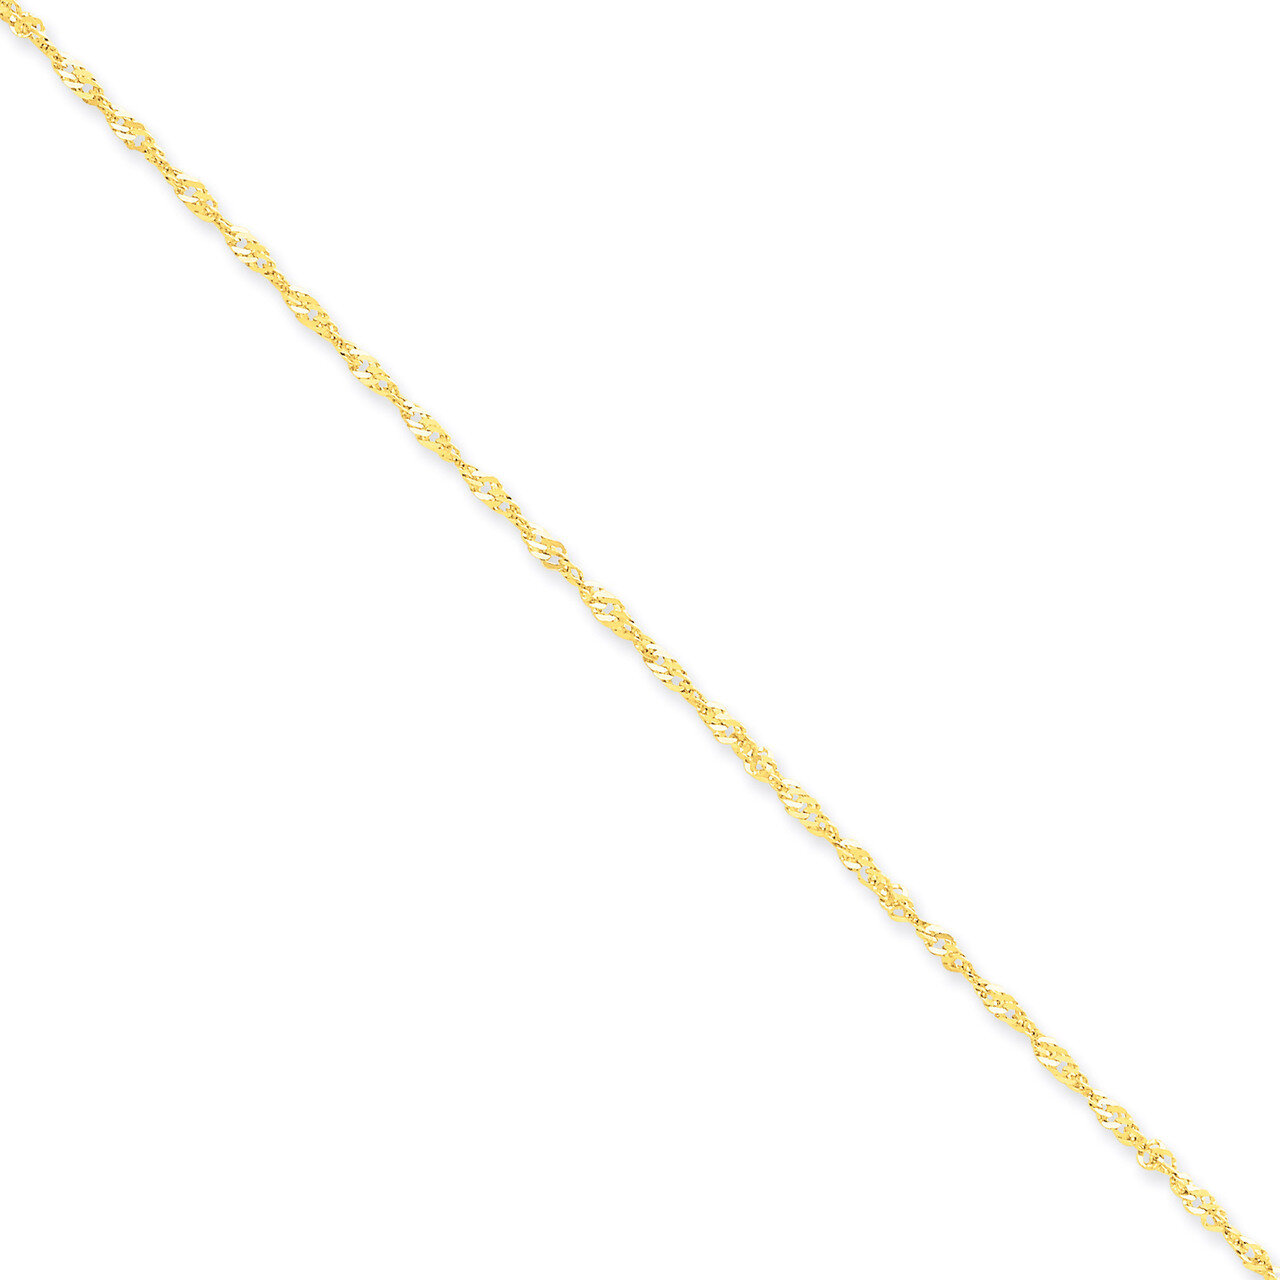 1.70mm Singapore Chain Anklet 10 Inch 14k Gold PEN10-10